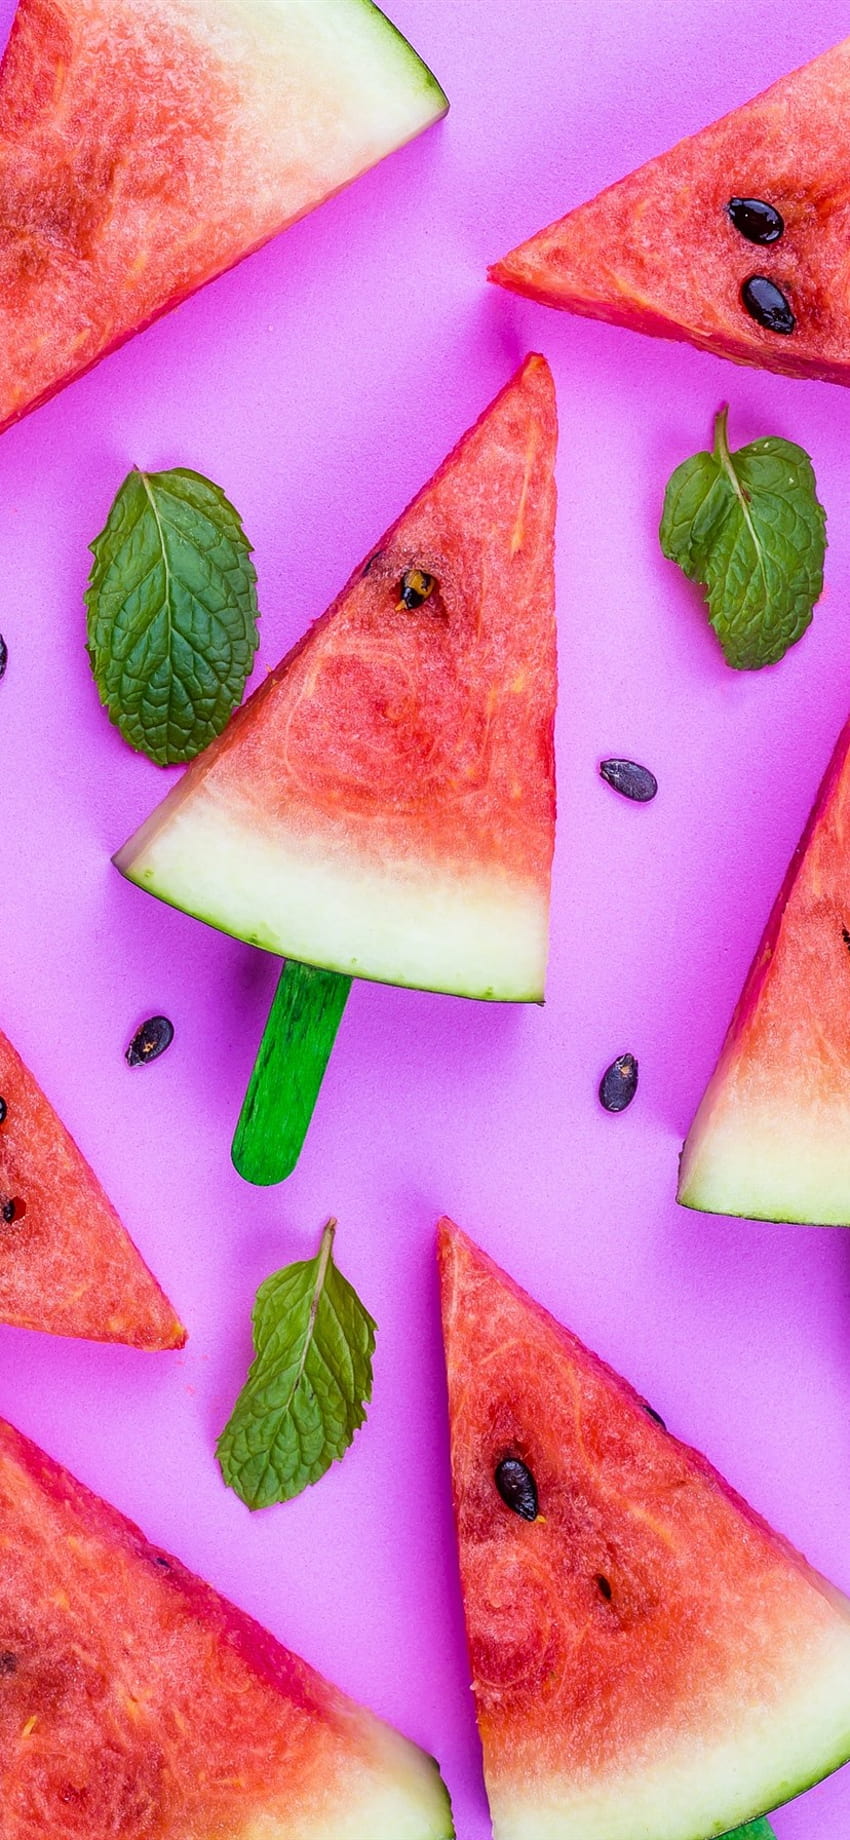 Some slices of watermelon, summer fruit, pink backgrounds 1080x1920 iPhone 8/7/6/6S Plus , background HD phone wallpaper